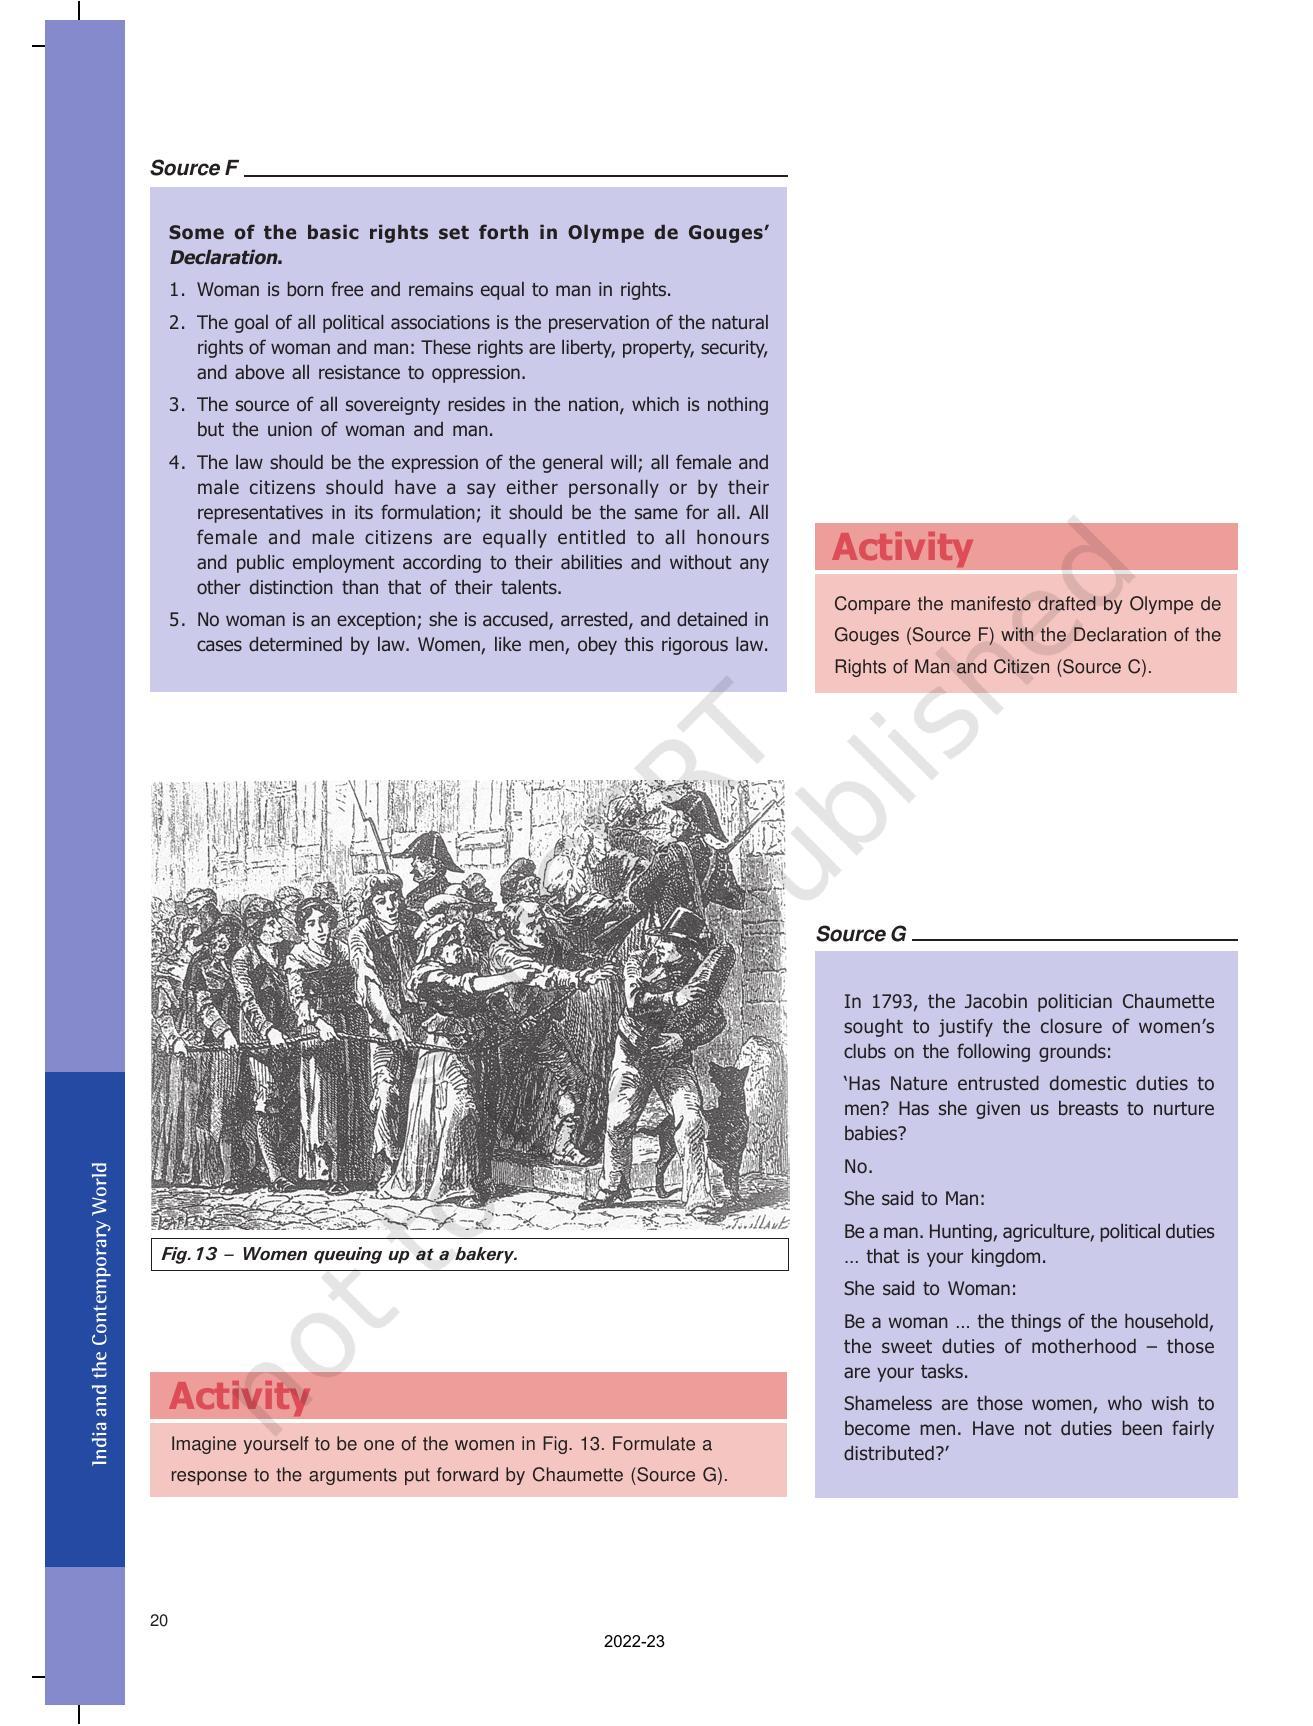 NCERT Book for Class 9 History Chapter 1 The French Revolution - Page 20